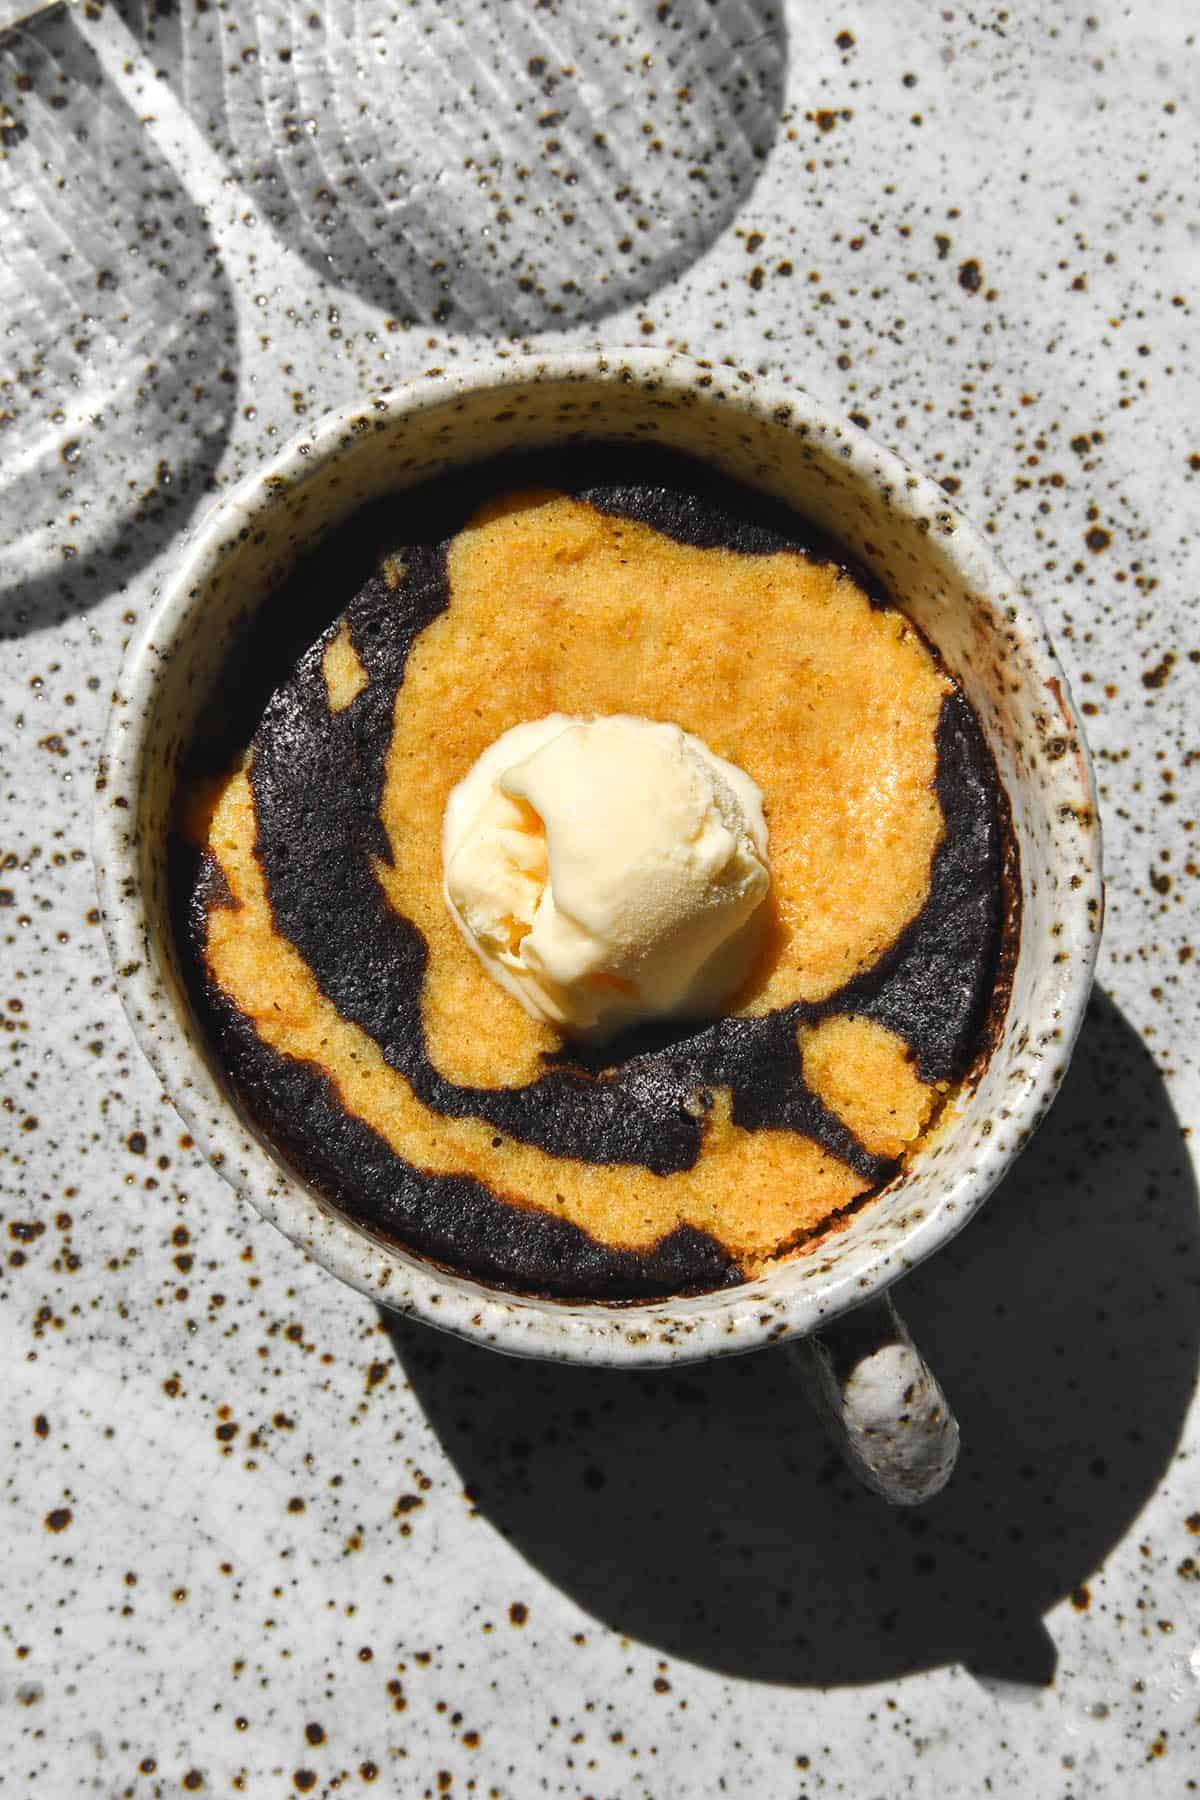 An aerial, sunlit image of a chocolate and pumpkin swirl mug cake topped with melting vanilla ice cream. The mug cake sits in a white speckled ceramic mug on a white speckled ceramic plate. Two textured glasses sit to the left of the image, casting light and shadow across the plate.